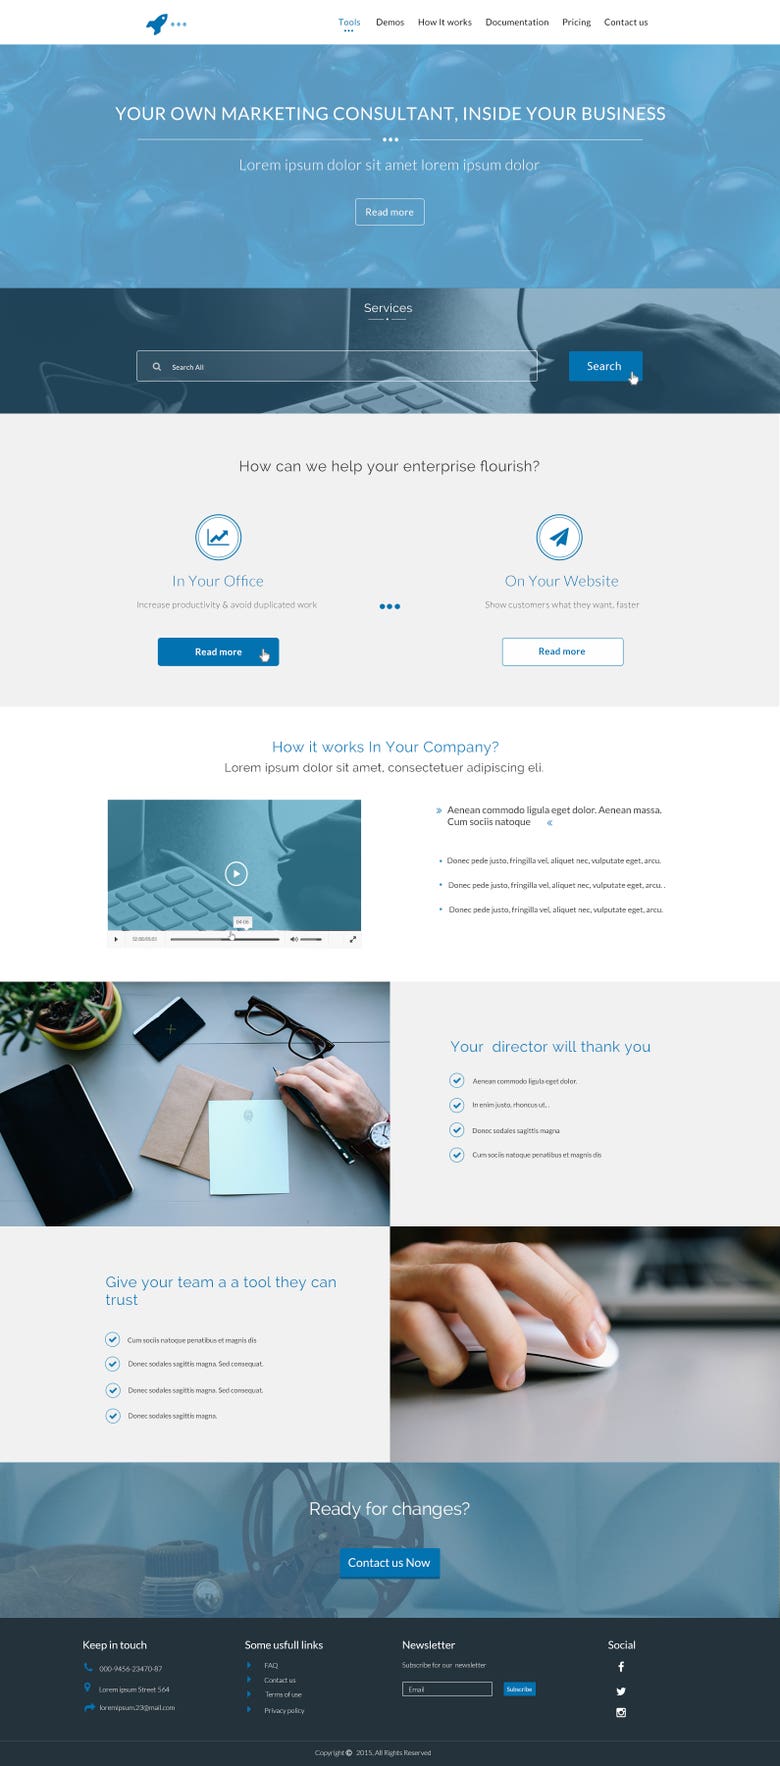 PSD mockup of Home page for Marketing Company